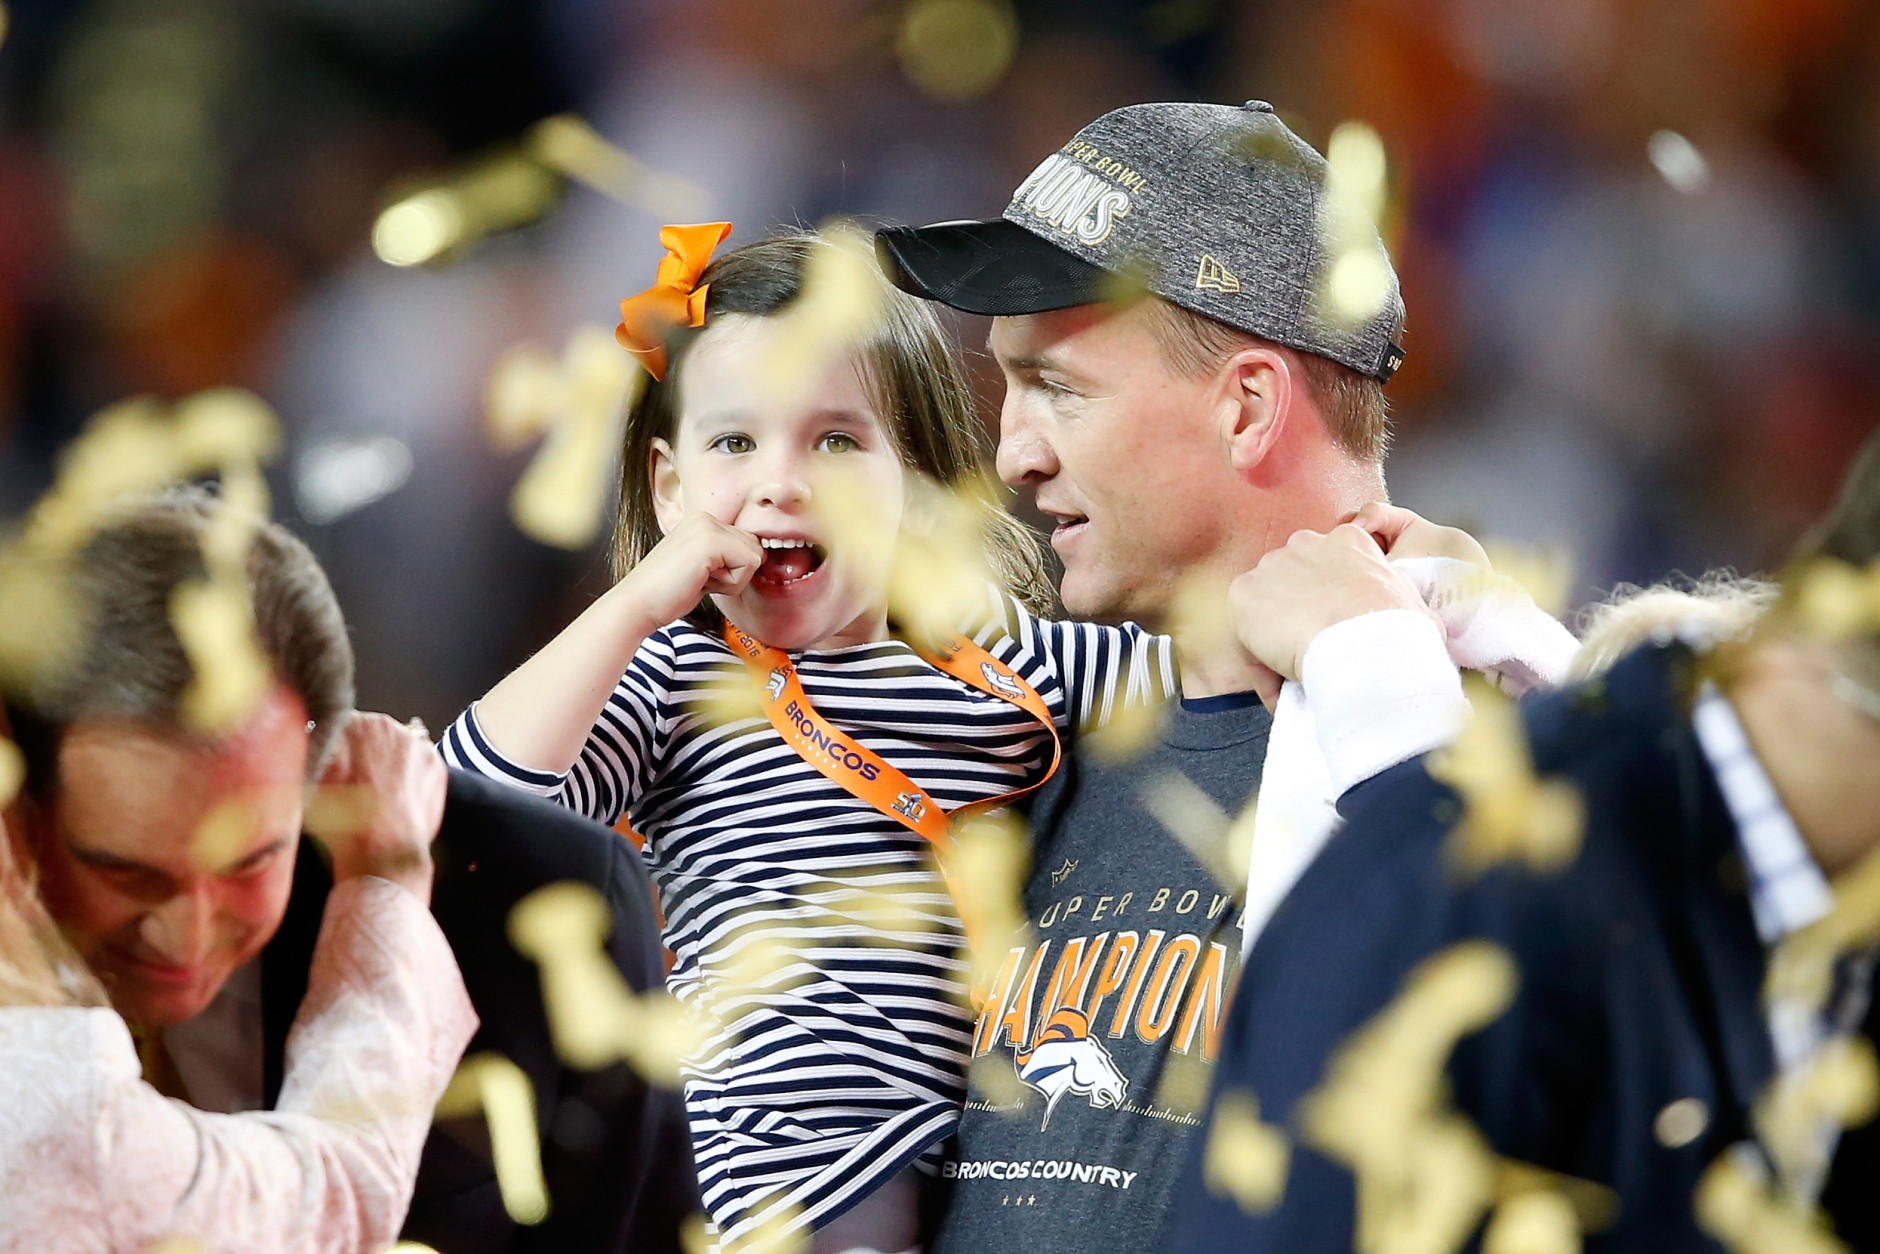 SANTA CLARA, CA - FEBRUARY 07:  Peyton Manning #18 of the Denver Broncos holds his daughter Mosley after the Denver Broncos defeated the Carolina Panthers with a score of 24 to 10 to win Super Bowl 50 at Levi's Stadium on February 7, 2016 in Santa Clara, California.  (Photo by Sean M. Haffey/Getty Images)